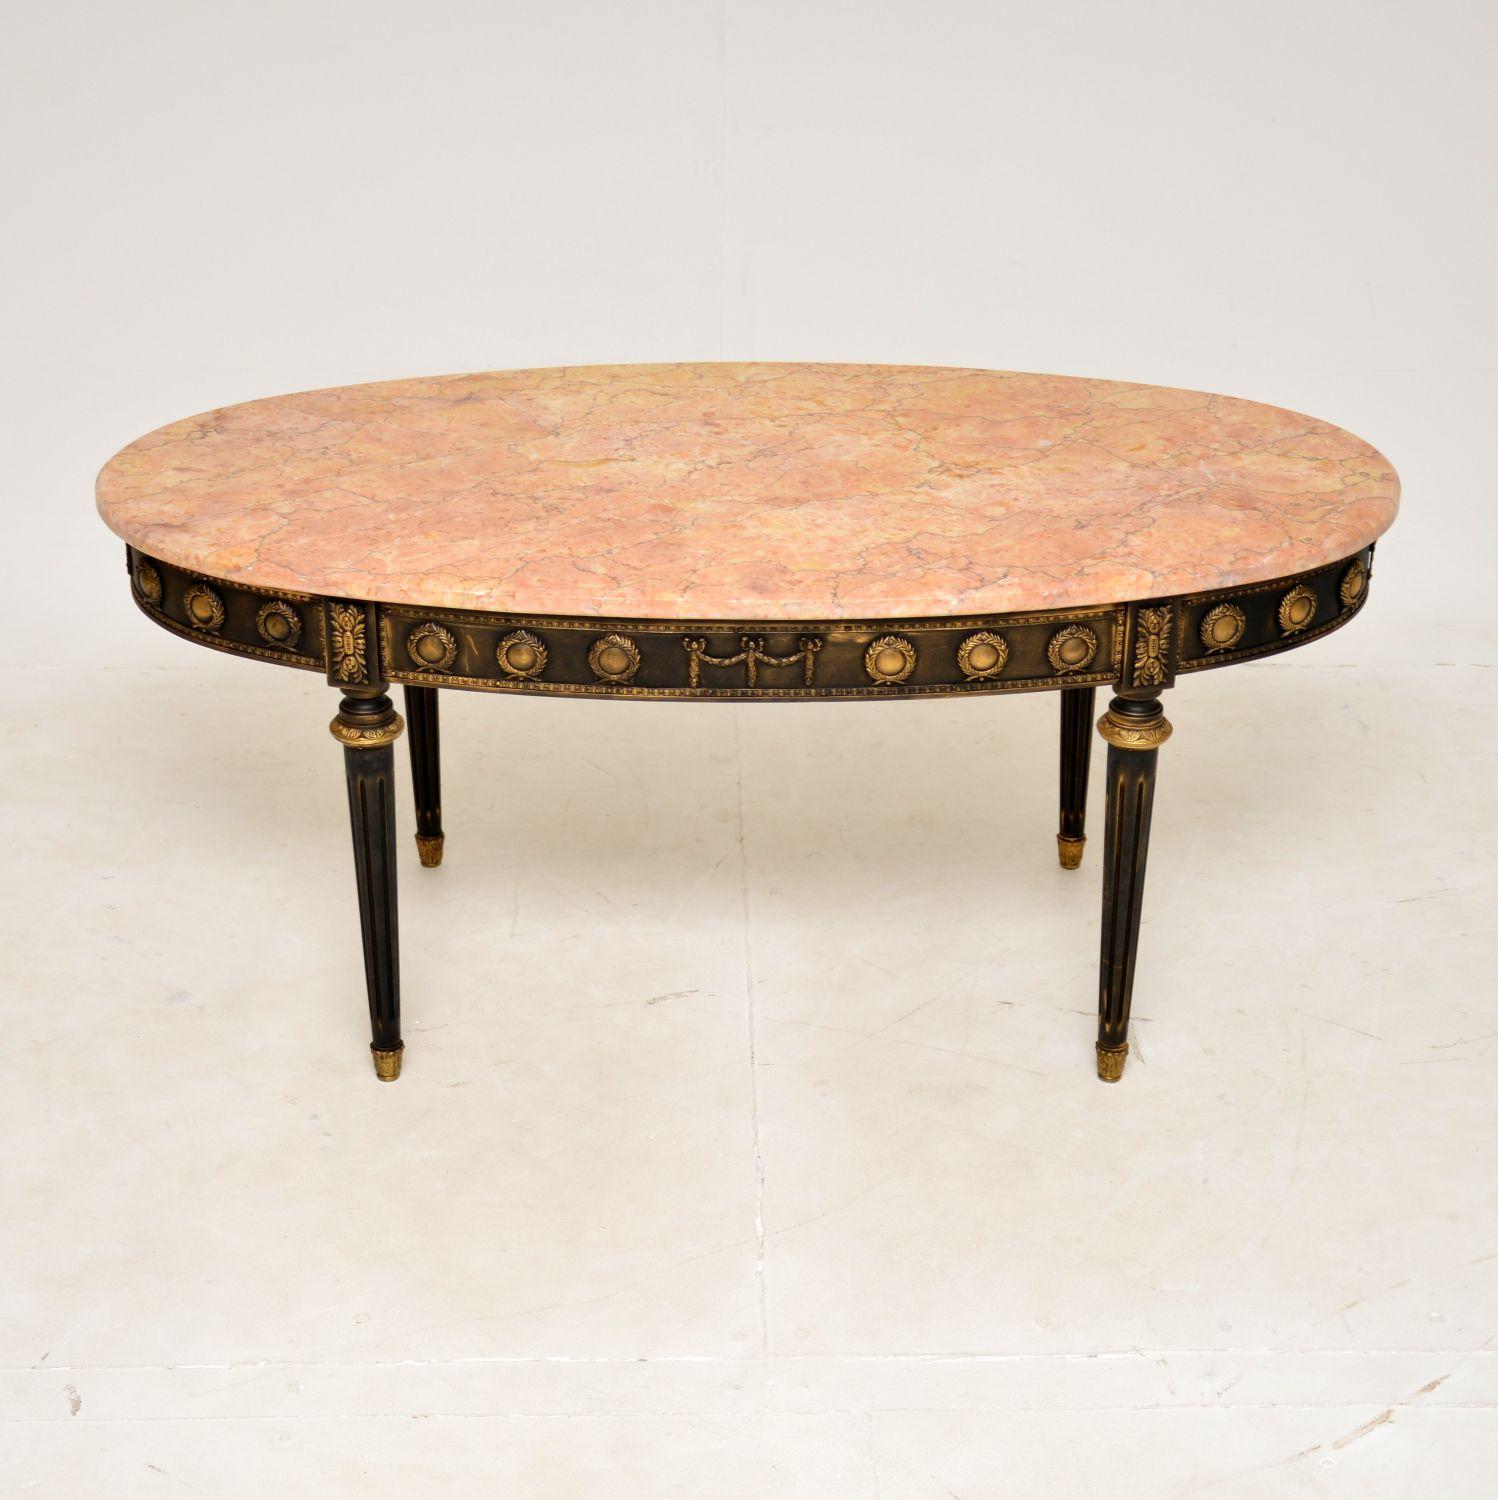 A lovely antique French marble top coffee table, dating from around the 1950s.

This is very well made and has a striking look. The frame has a distressed black finish, and is offset nicely by the gilt metal ormolu mounts and pink marble